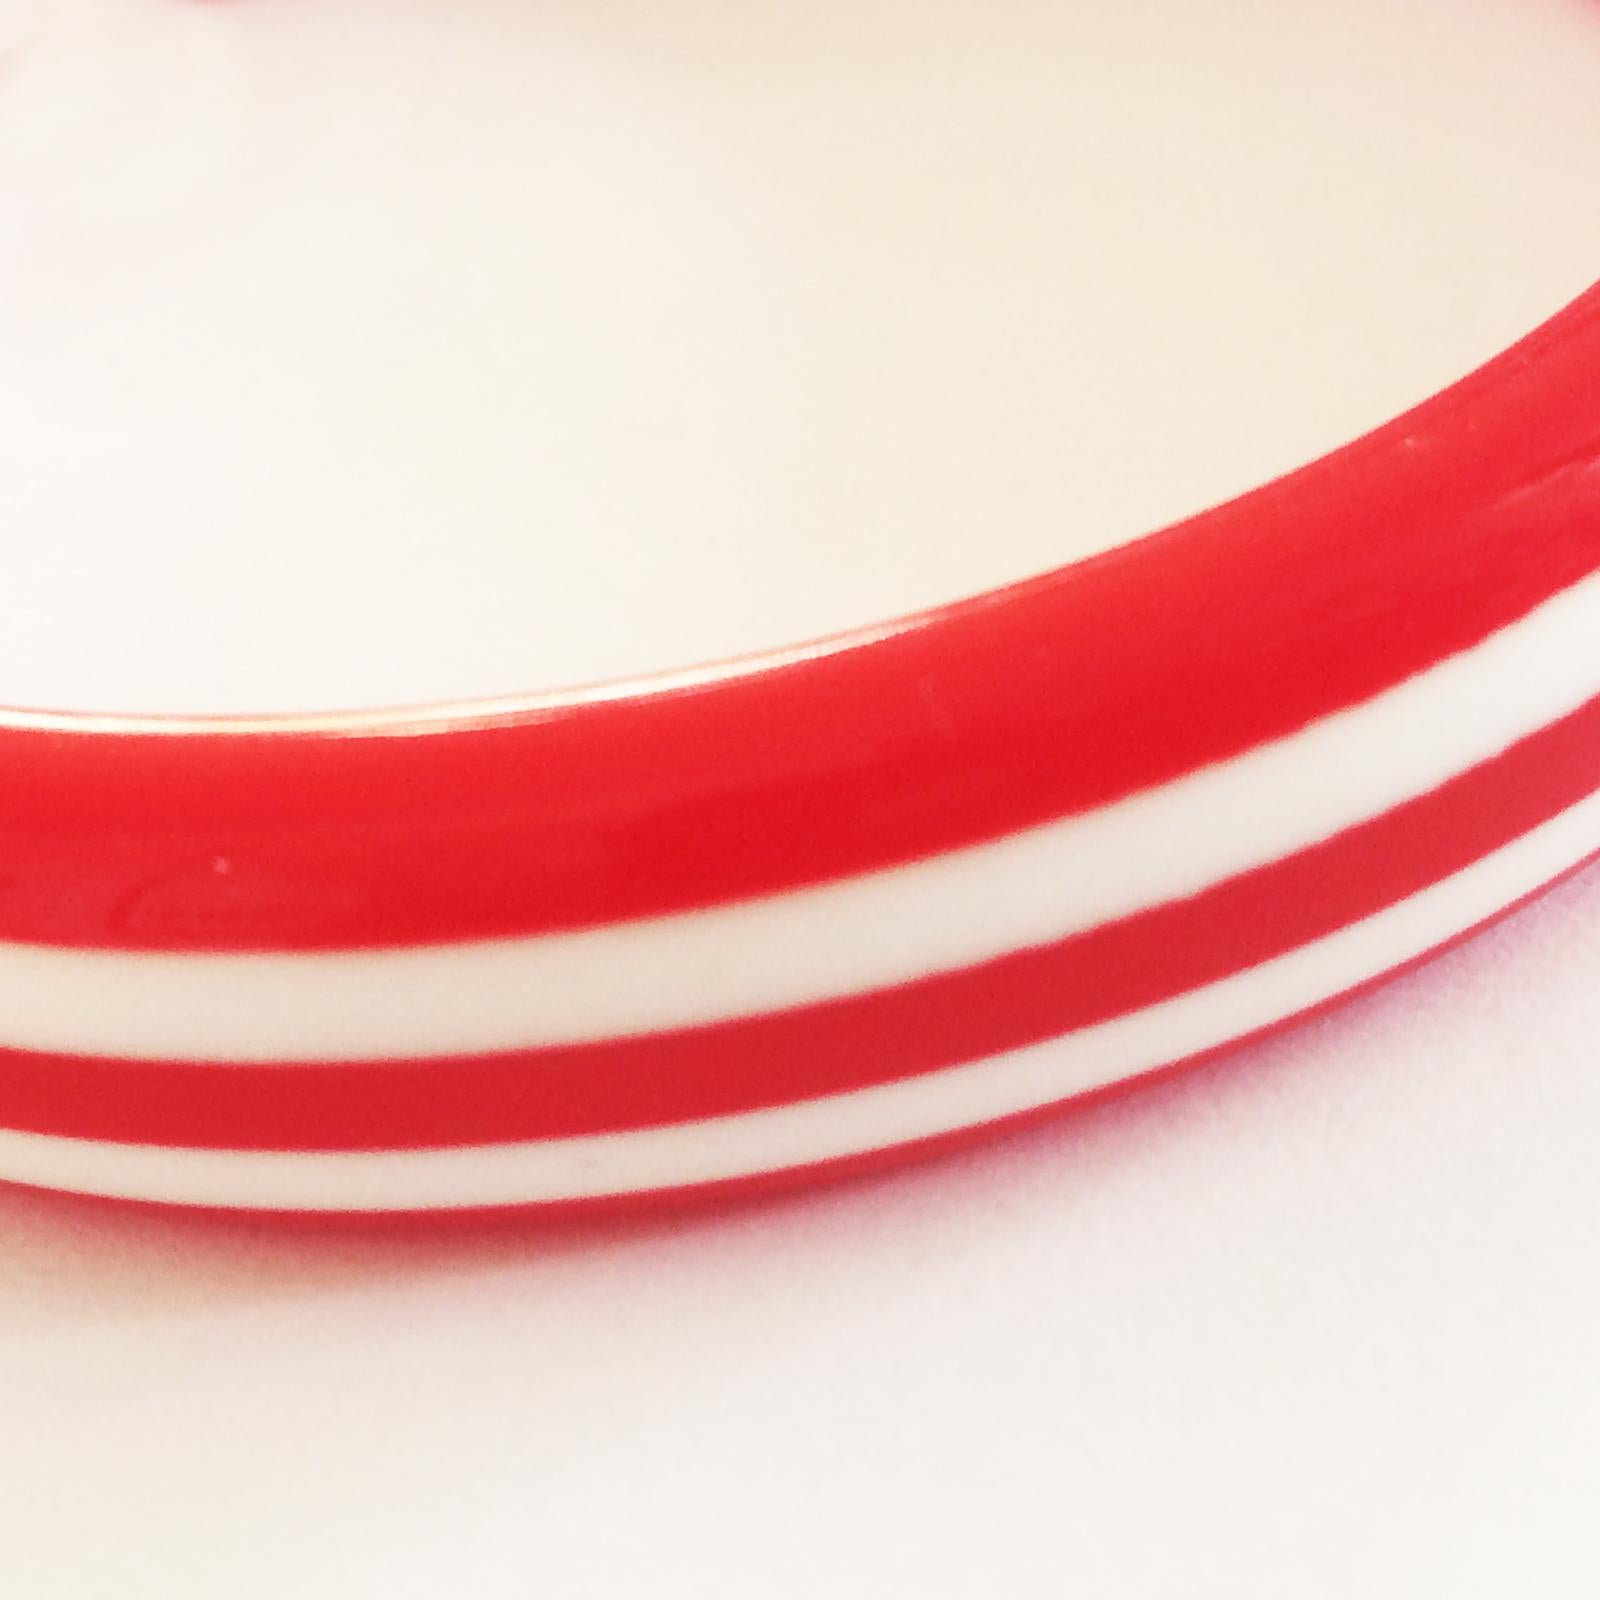 Mid Century French Bakelite Bangle in Crimson with parallel white stripes of similar width. A stunning design in a popular Deco colour and geometric stripes. Absolutely all in perfect condition, no damage or repairs. Dimensions are approx..: Inner